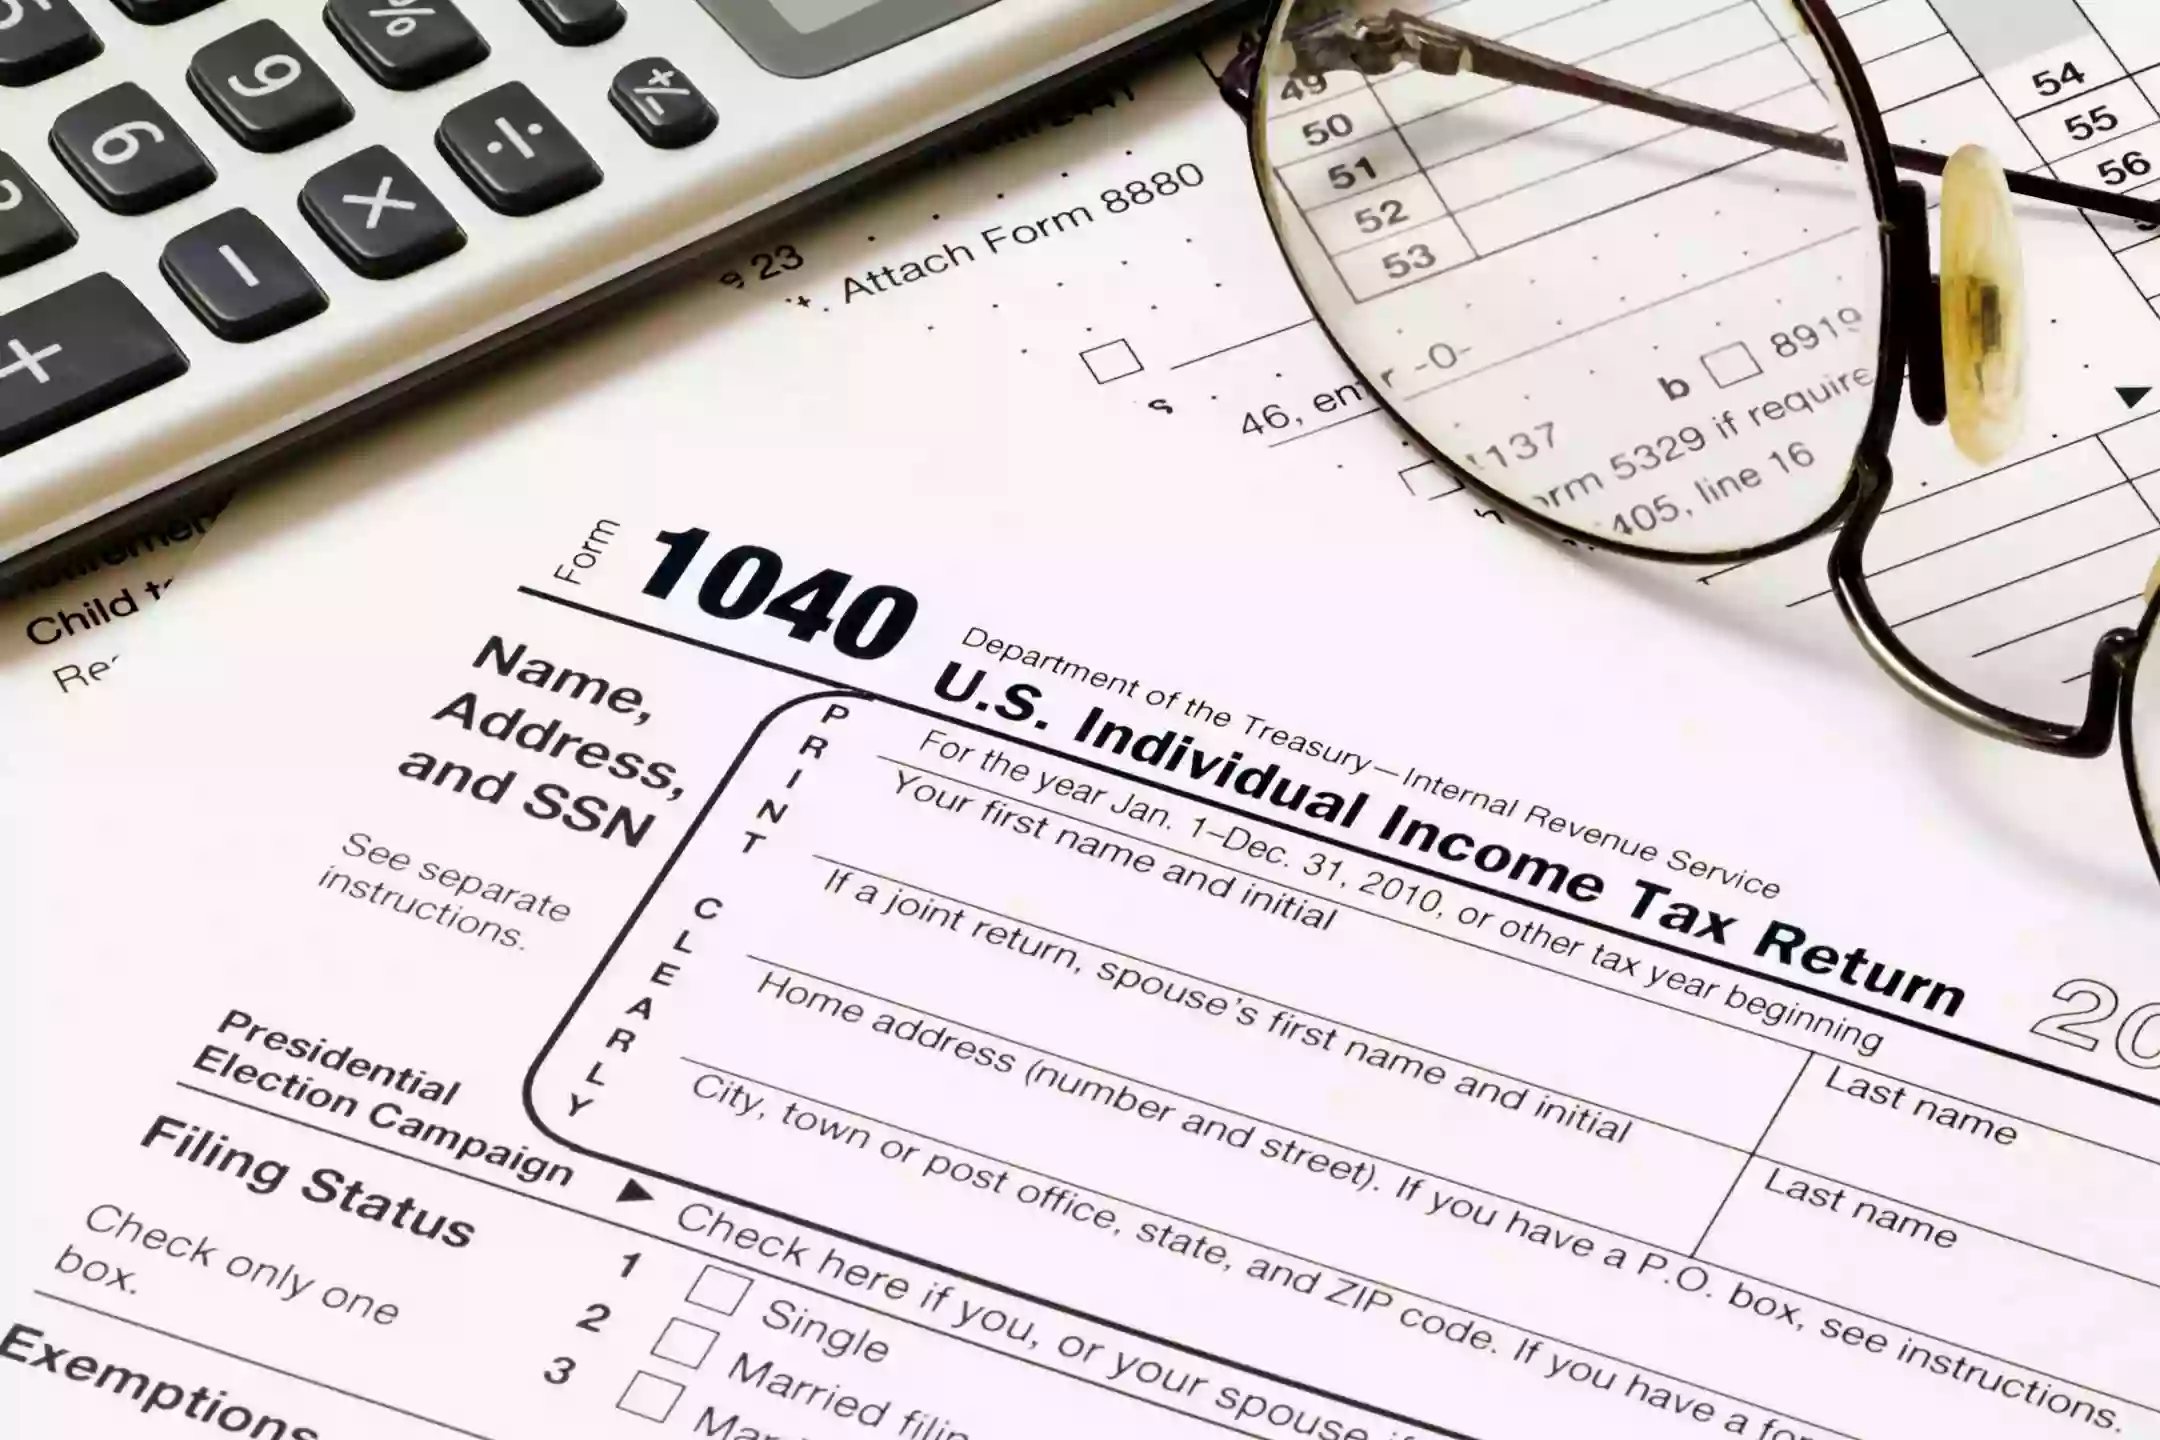 A Accounting & Tax Services